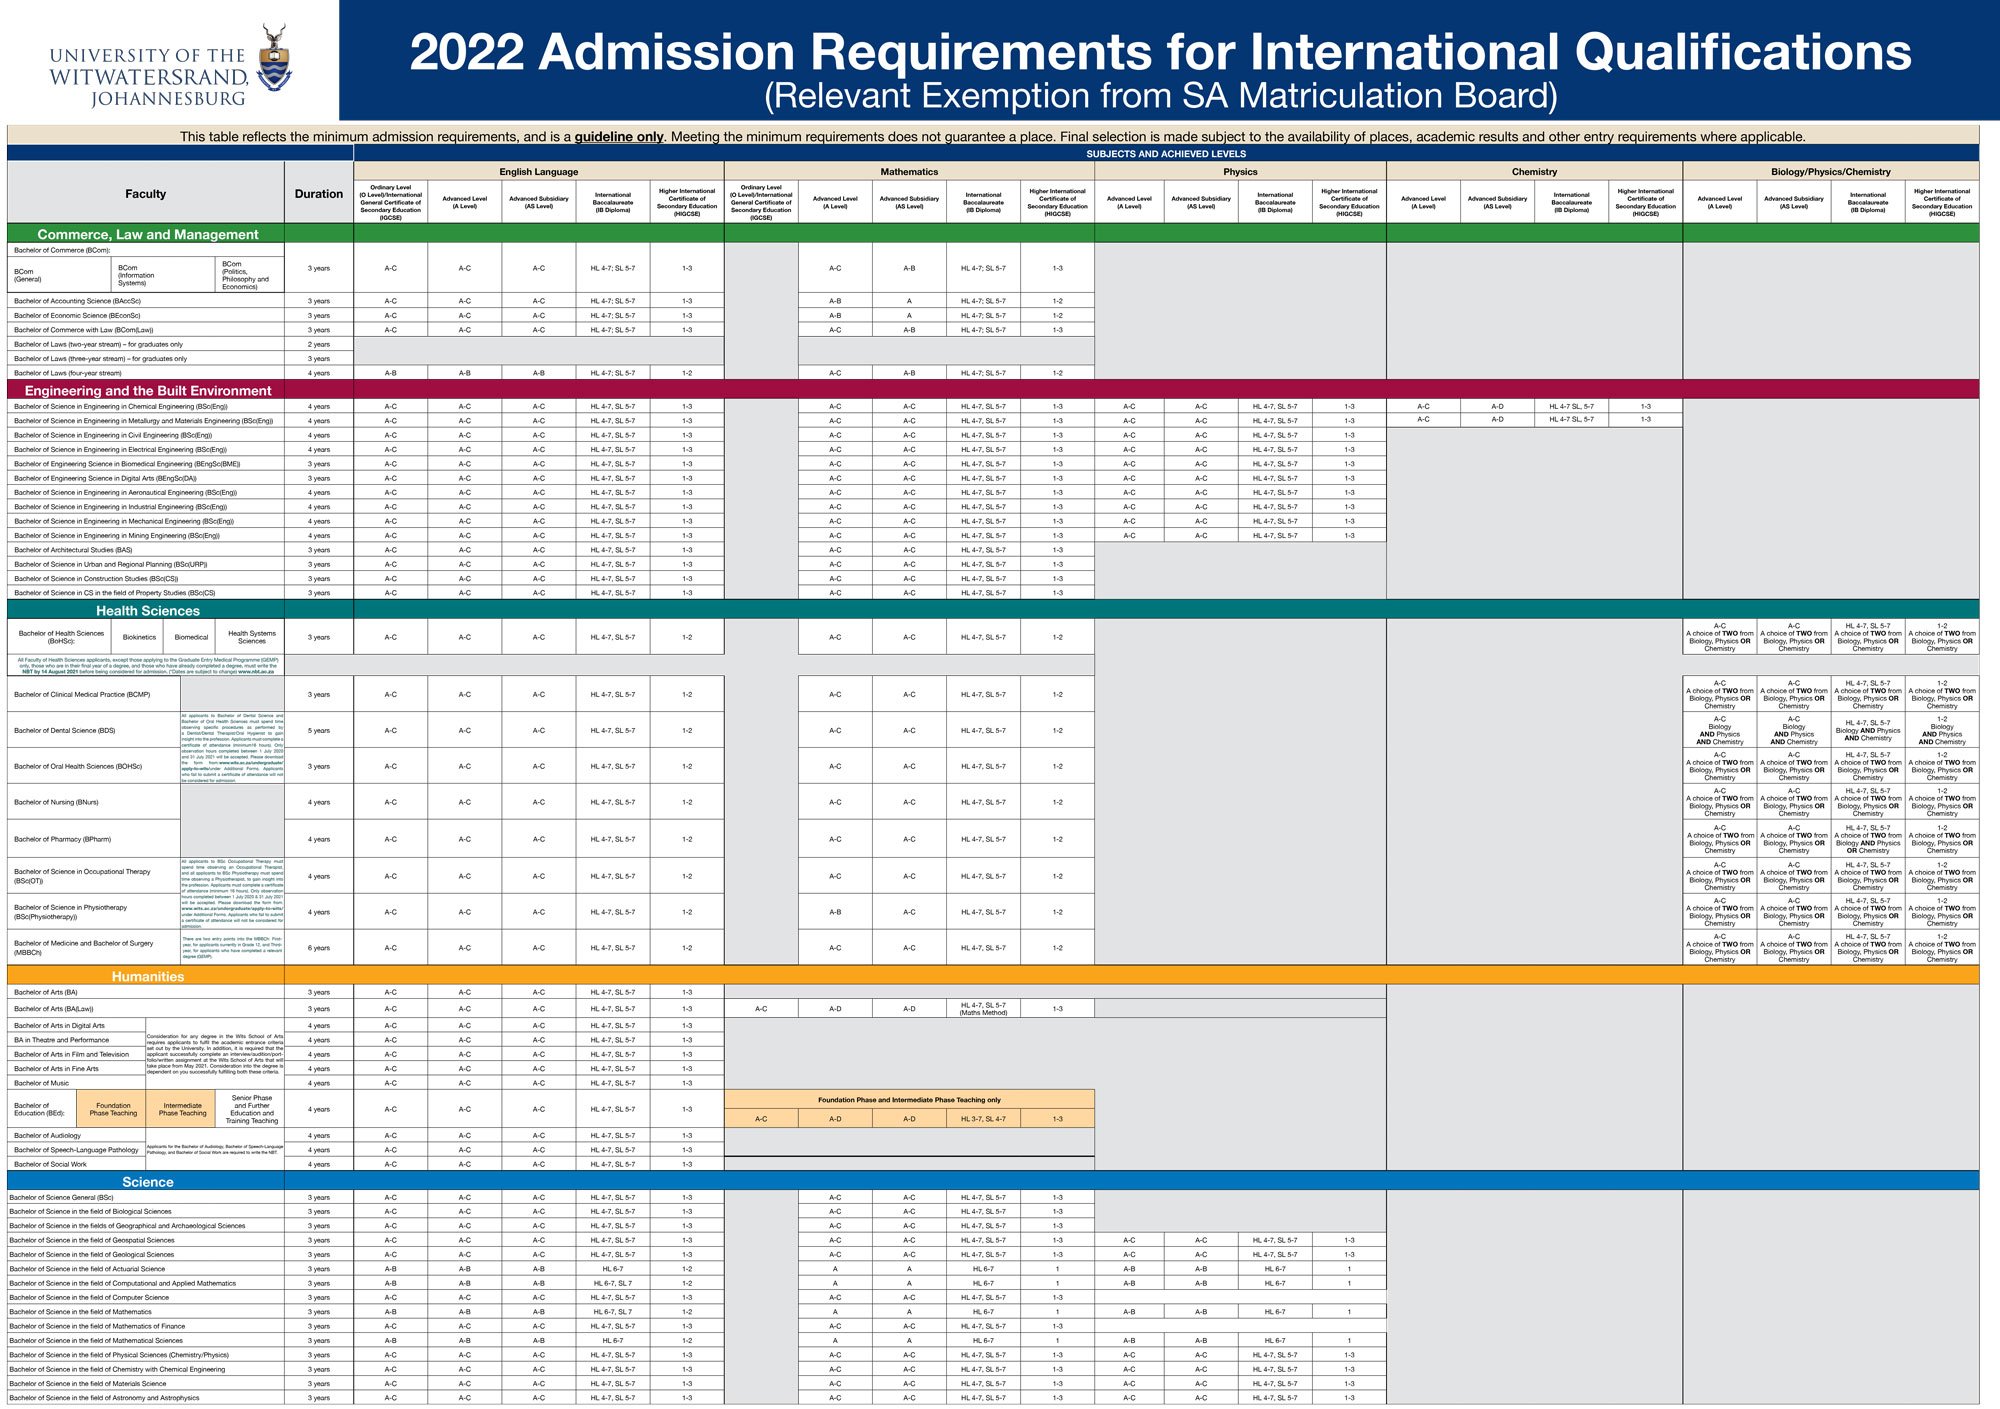 What Wits University Courses and Requirements for 2024 are ApplicationSA